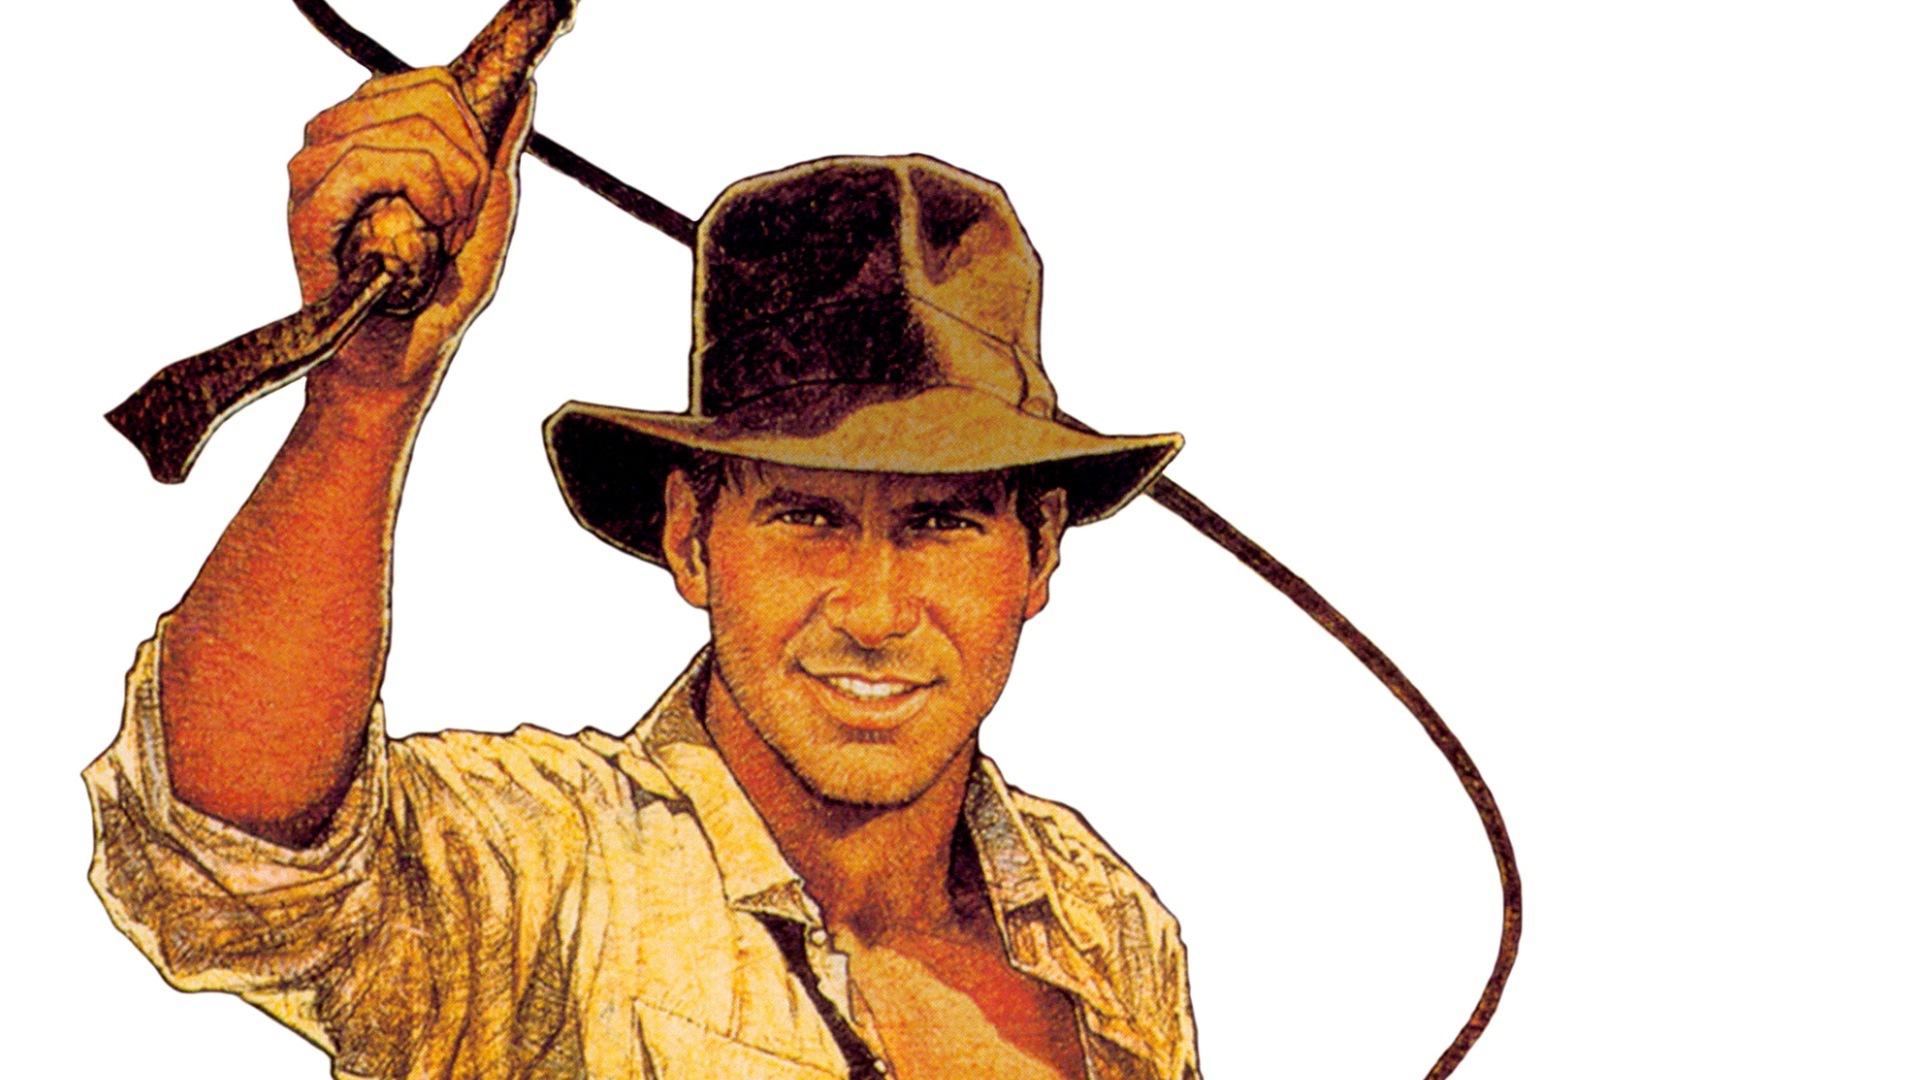 Indiana Jones and the Reboot: Without Indy | GeekGirl World | All ...